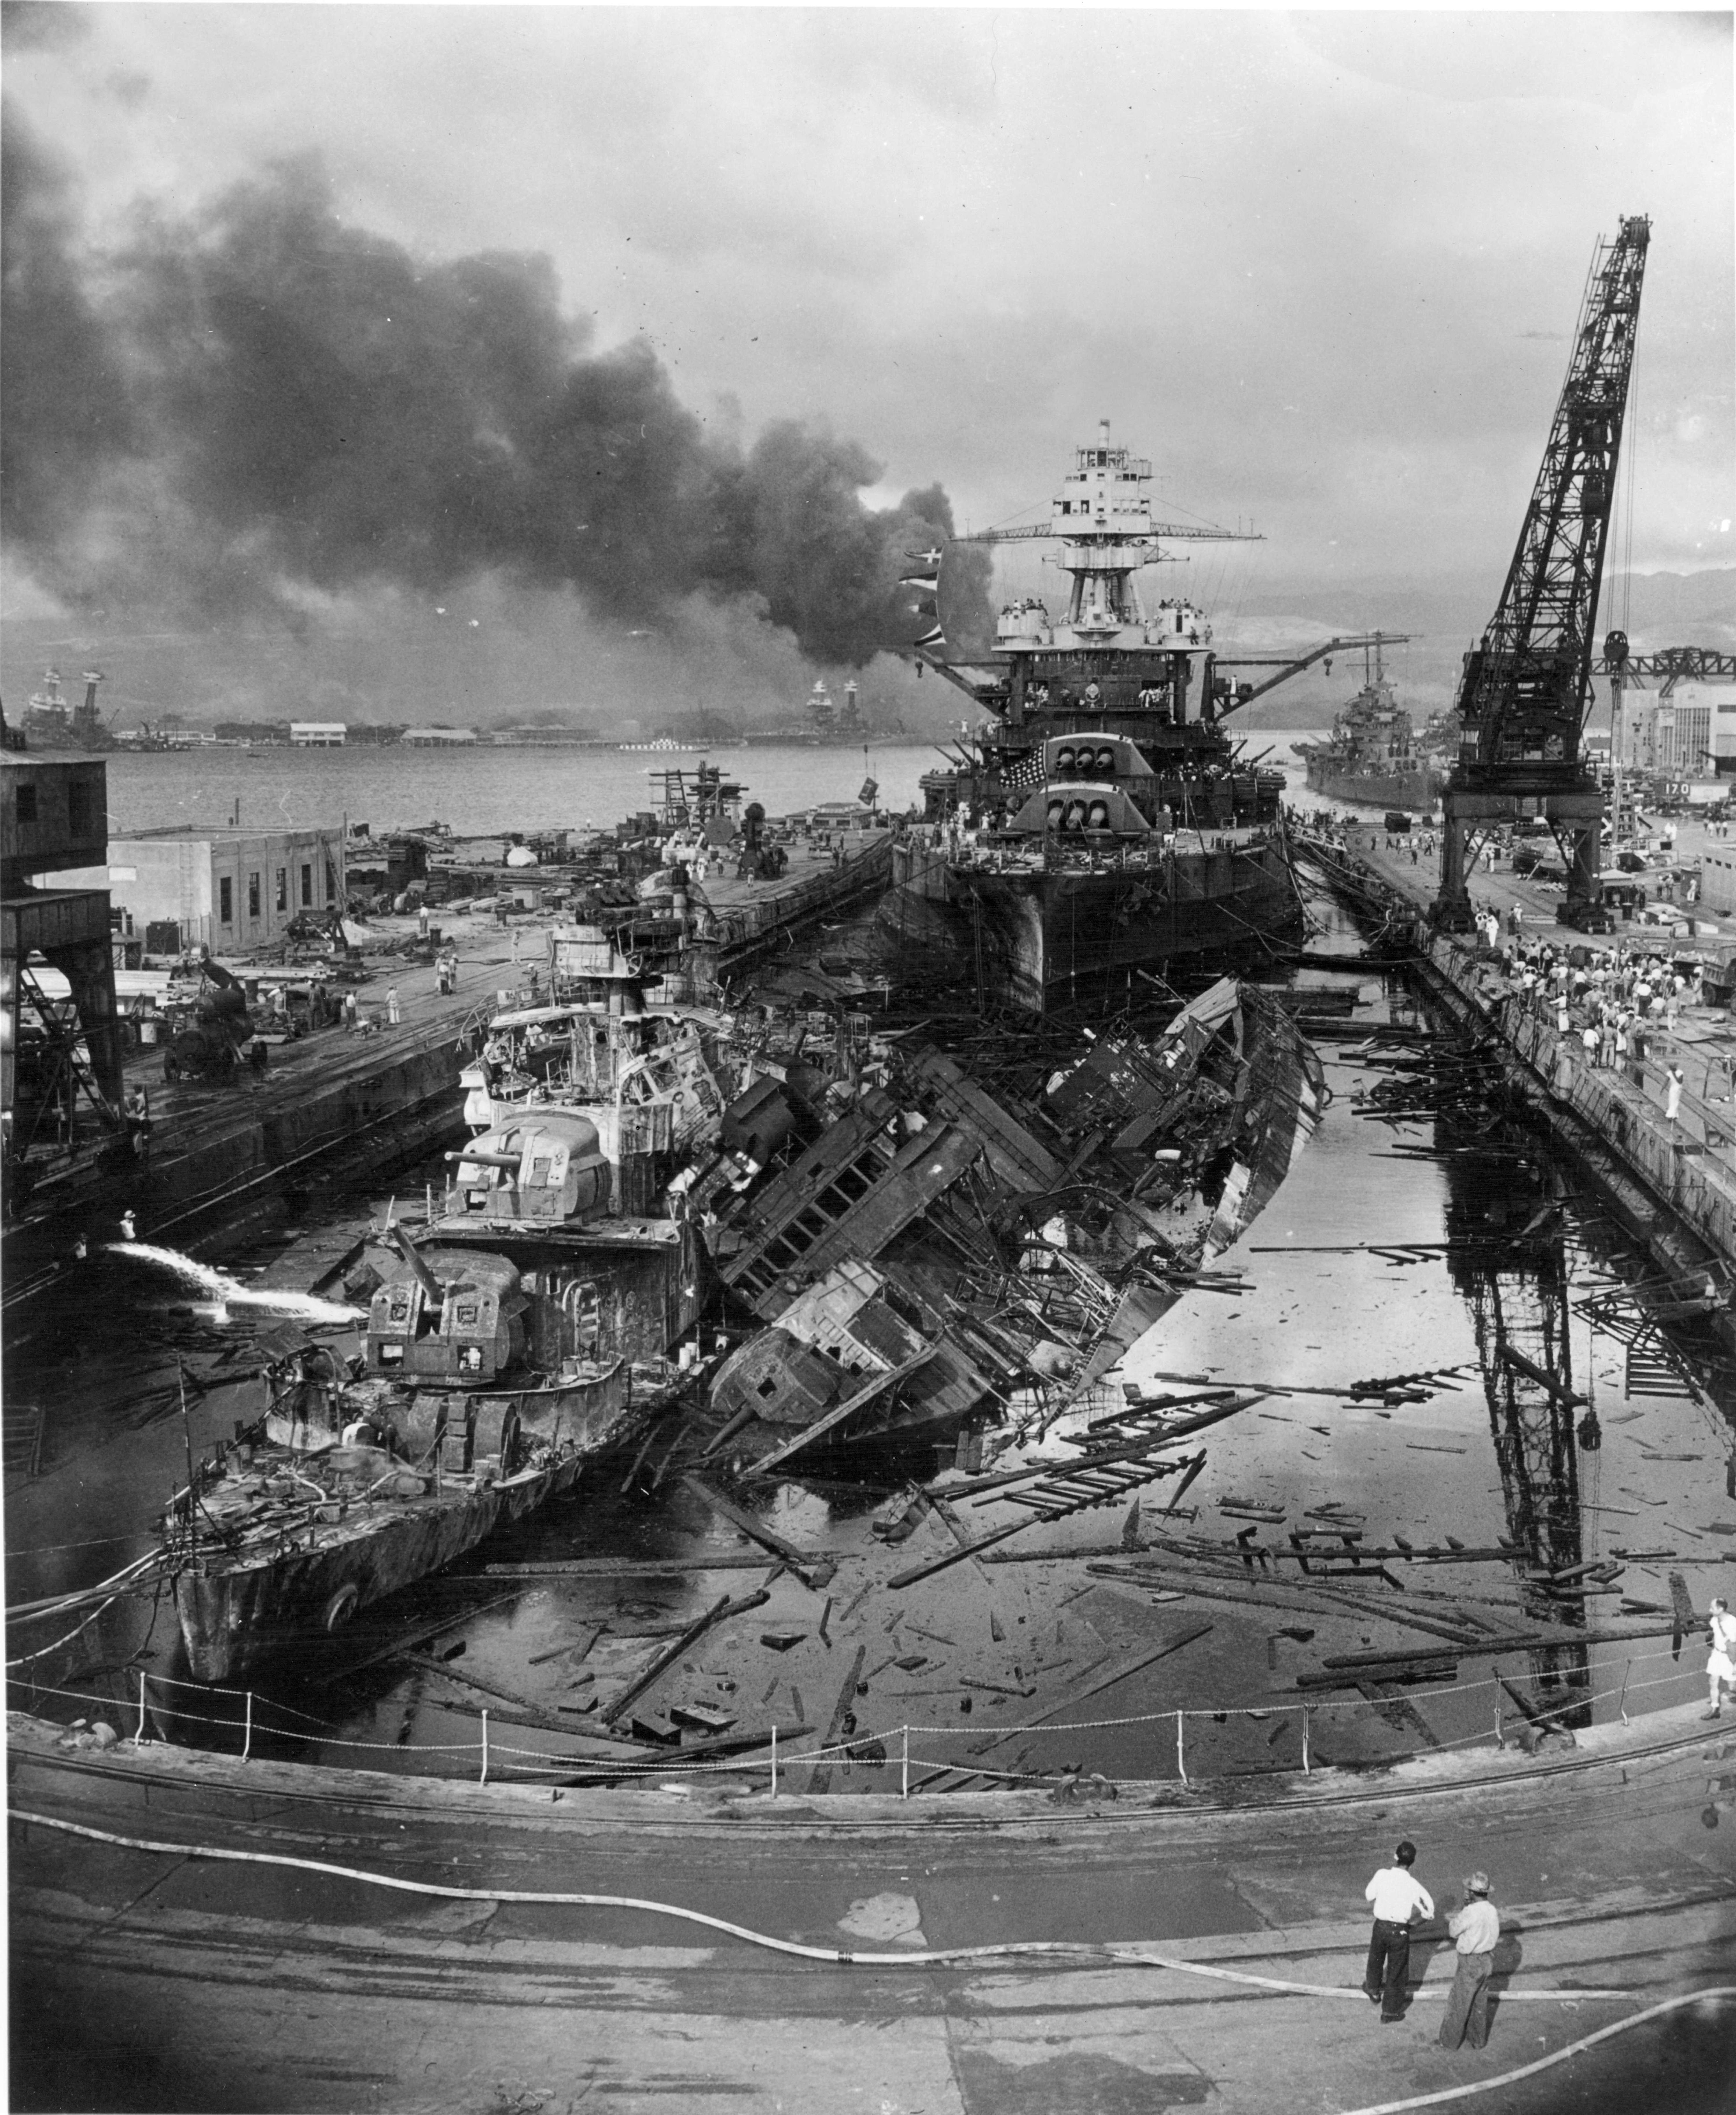 Wrecks of destroyers Downes and Cassin in Drydock One at Pearl Harbor Navy Yard, 7 Dec 1941 about 1400, photo 1 of 5; note Pennsylvania in the rear, Helena in distance, Oklahoma and Maryland in far background